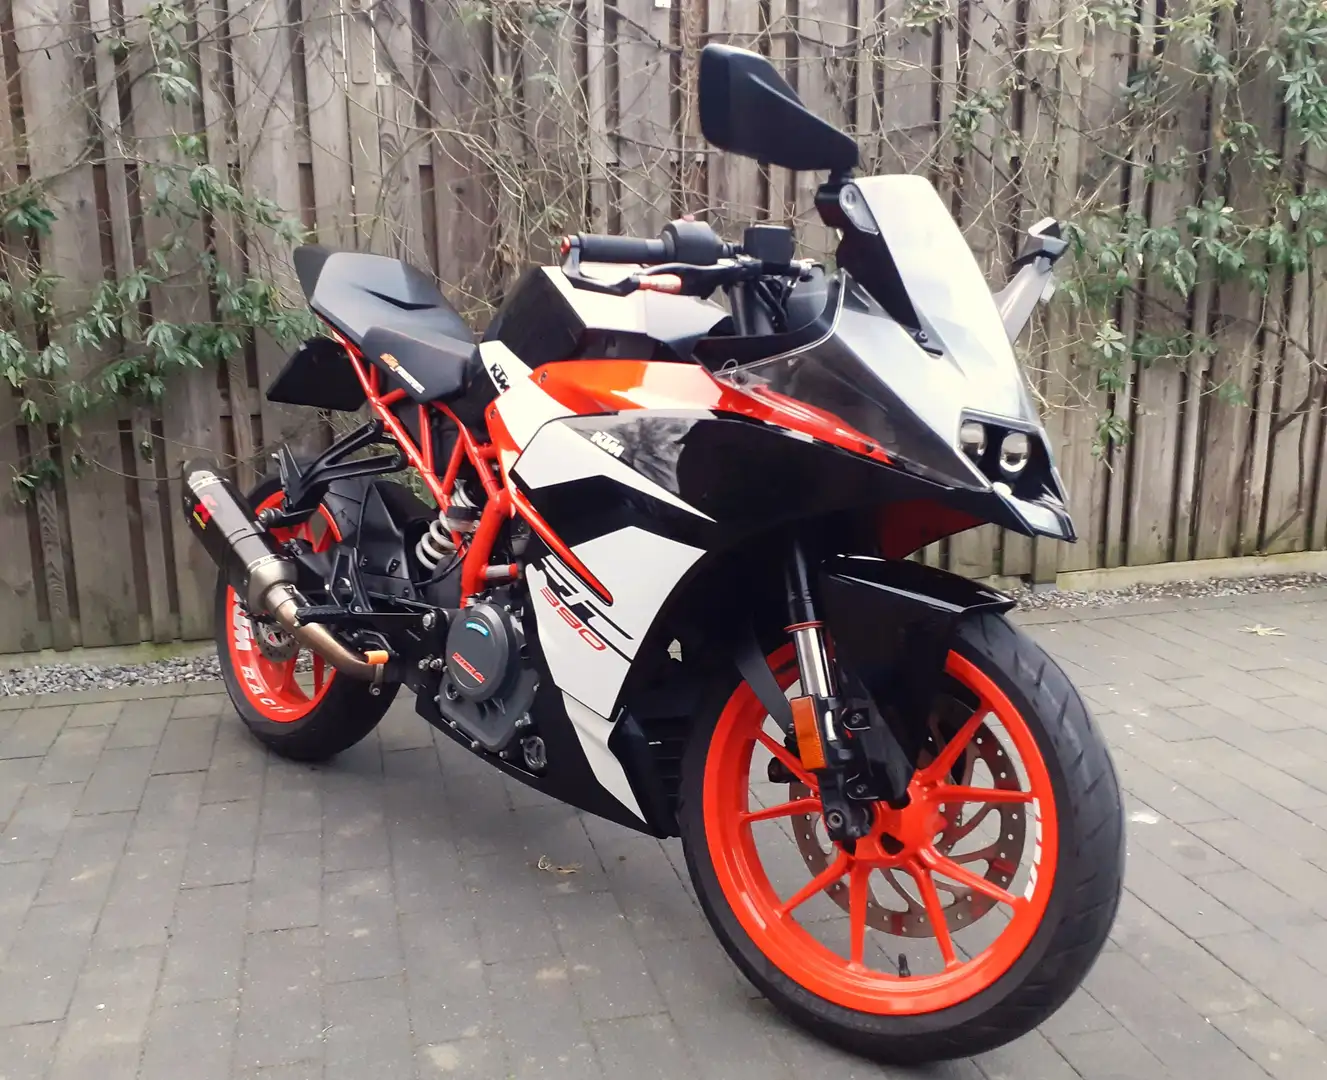 KTM RC 390 A2 code 80 35kW | slechts 6.981 km | in topstaat! Siyah - 2